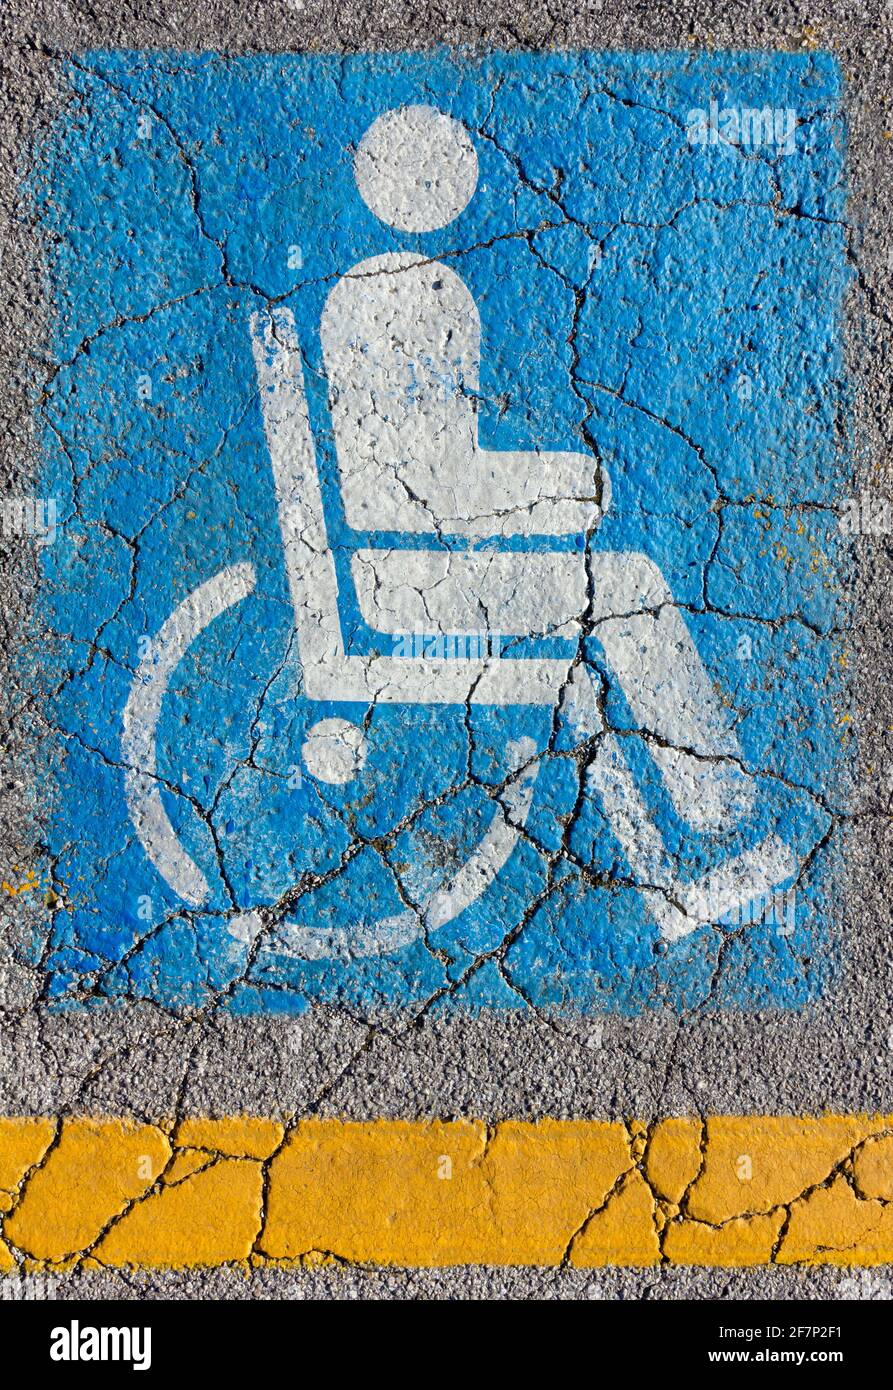 International access sign on a cracked asphalt with a yellow strip below Stock Photo